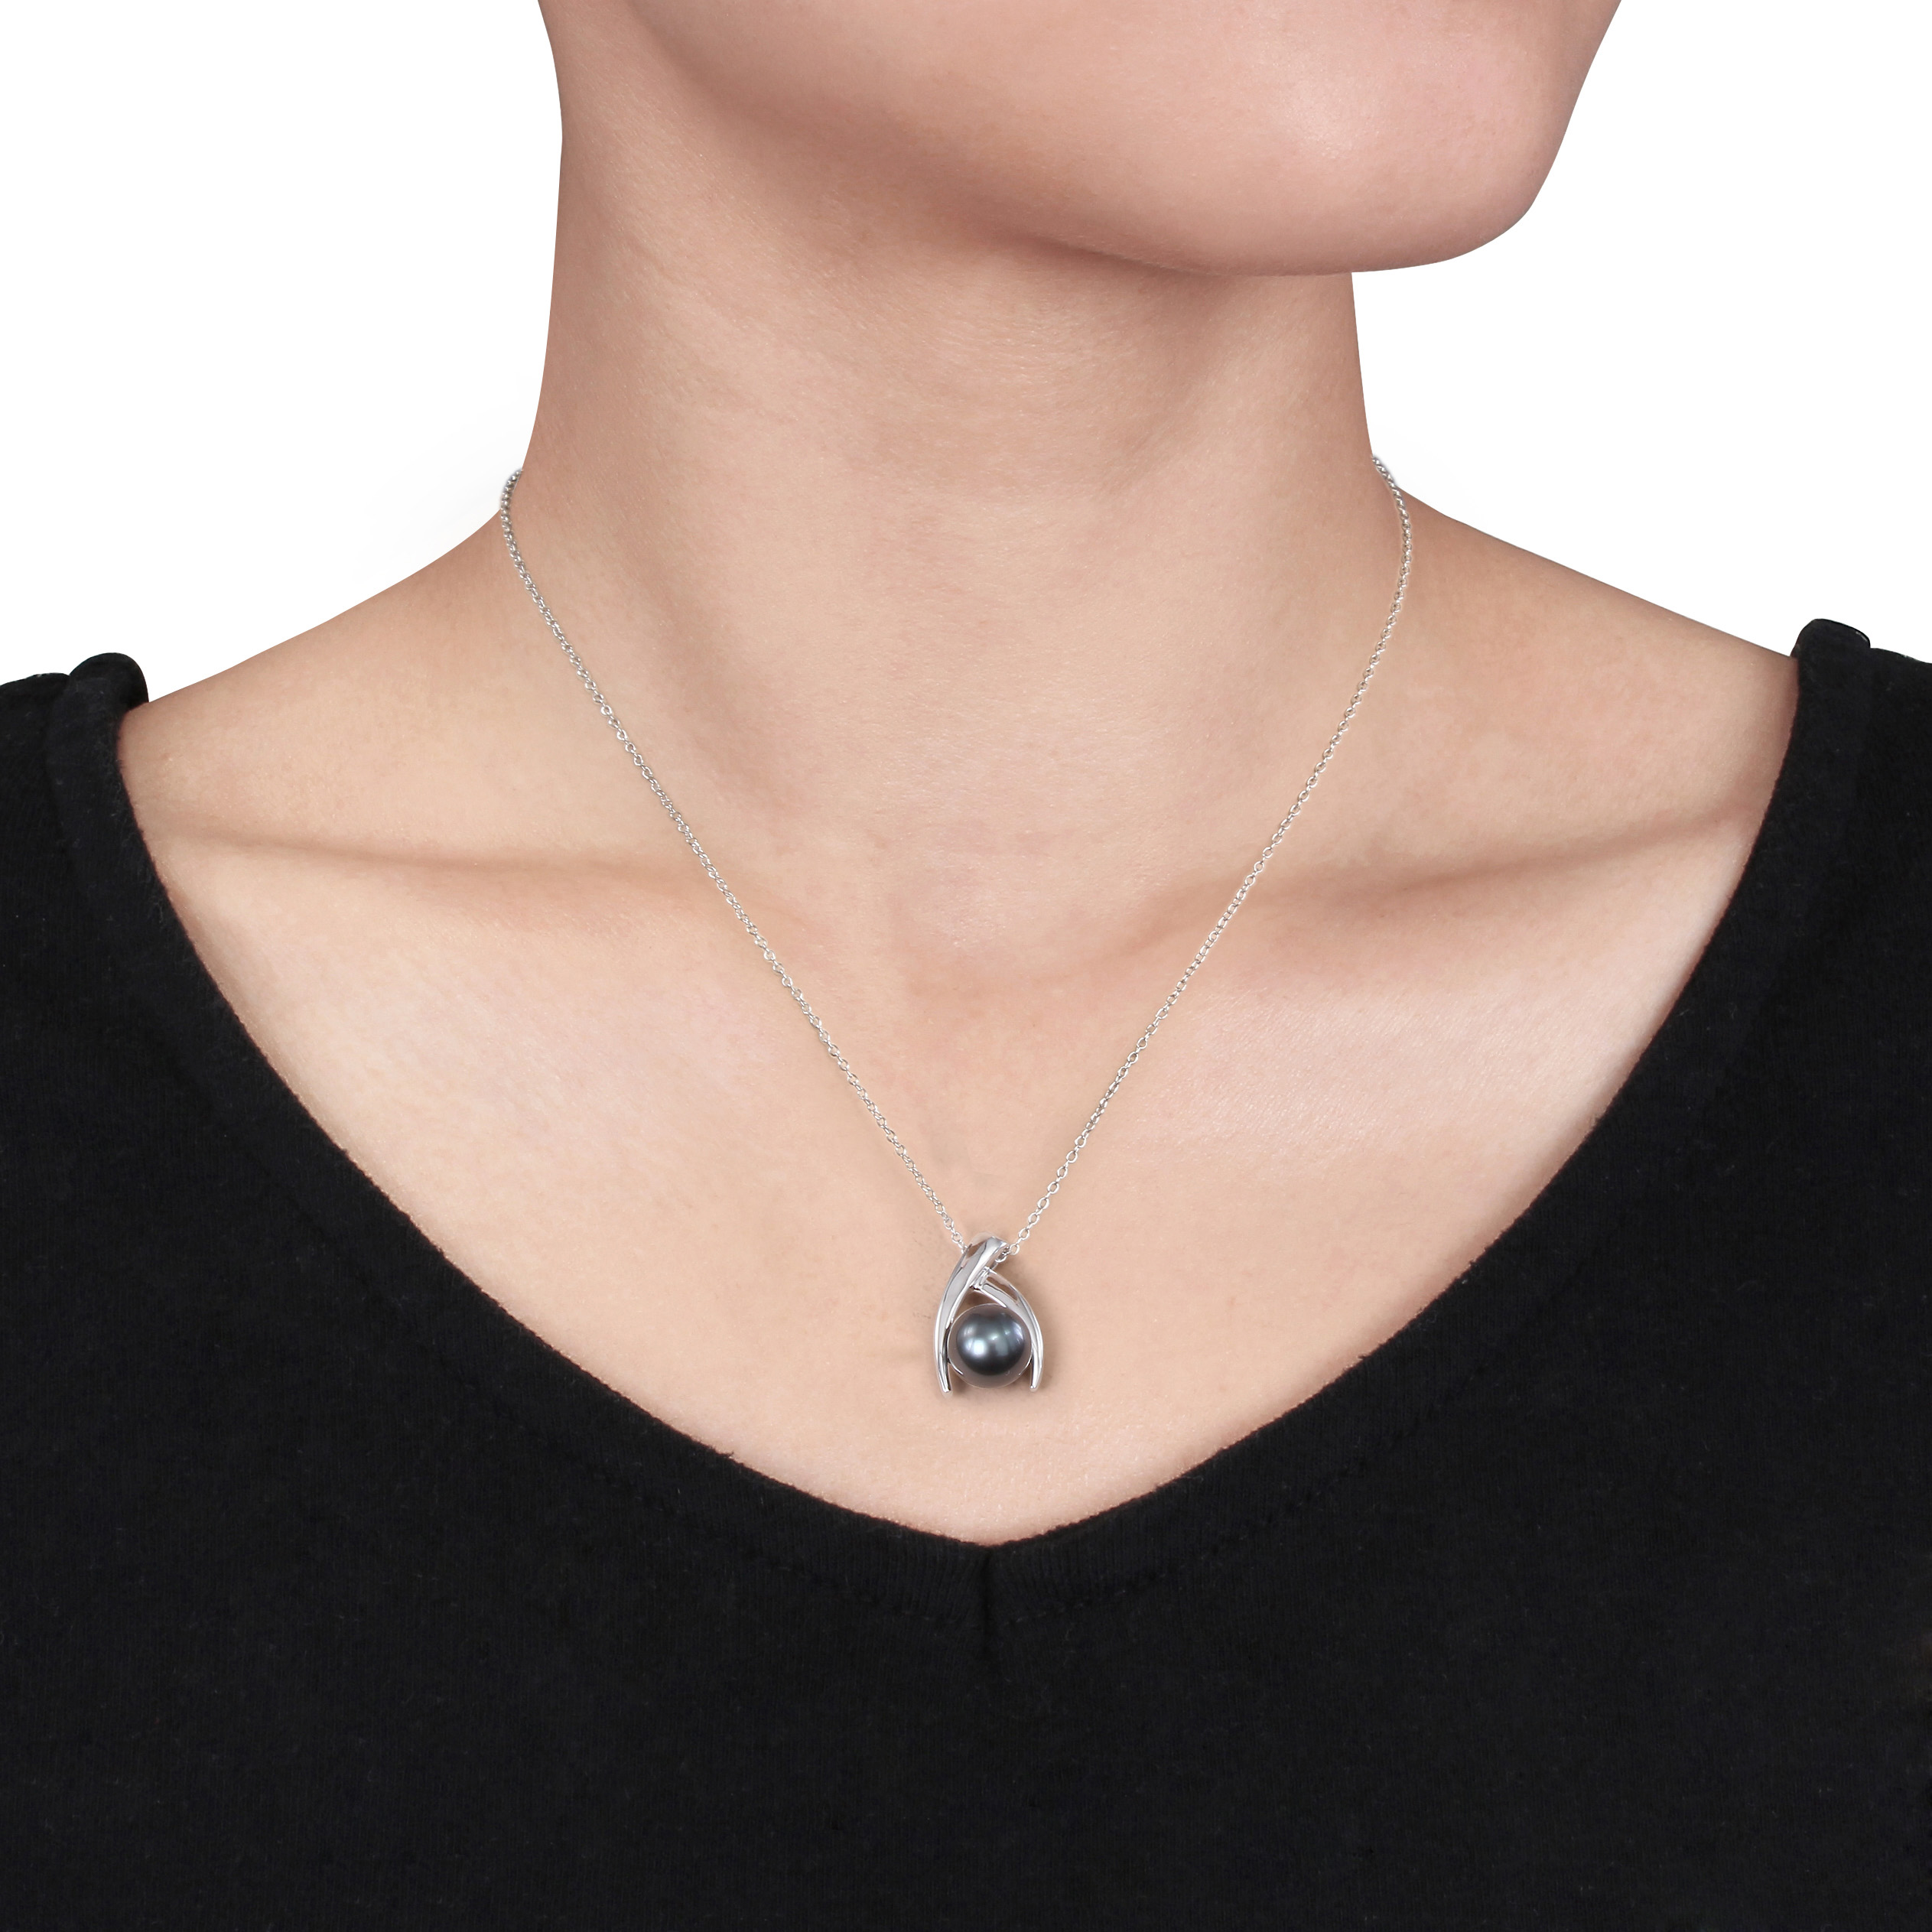 9.5 - 10 MM Black Tahitian Pearl Crisscross Pendant with Chain in Sterling Silver